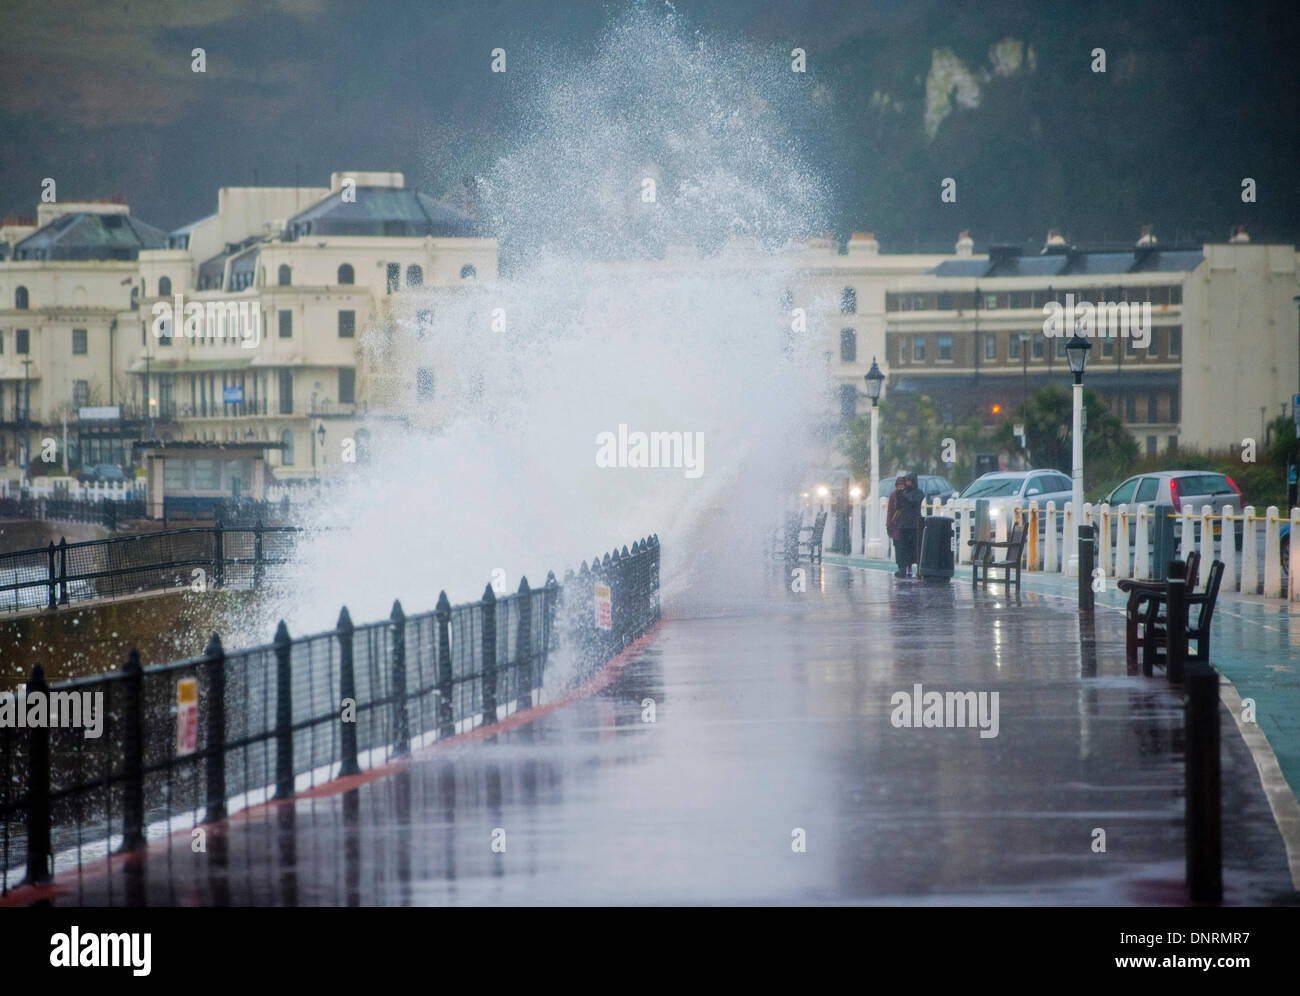 Dover, Kent, UK. 4th Jan, 2014. High wind, rain and waves hit the town of Dover, Kent. 4th January 2014. Photo by Brian Jordan/Alamy Live News Stock Photo